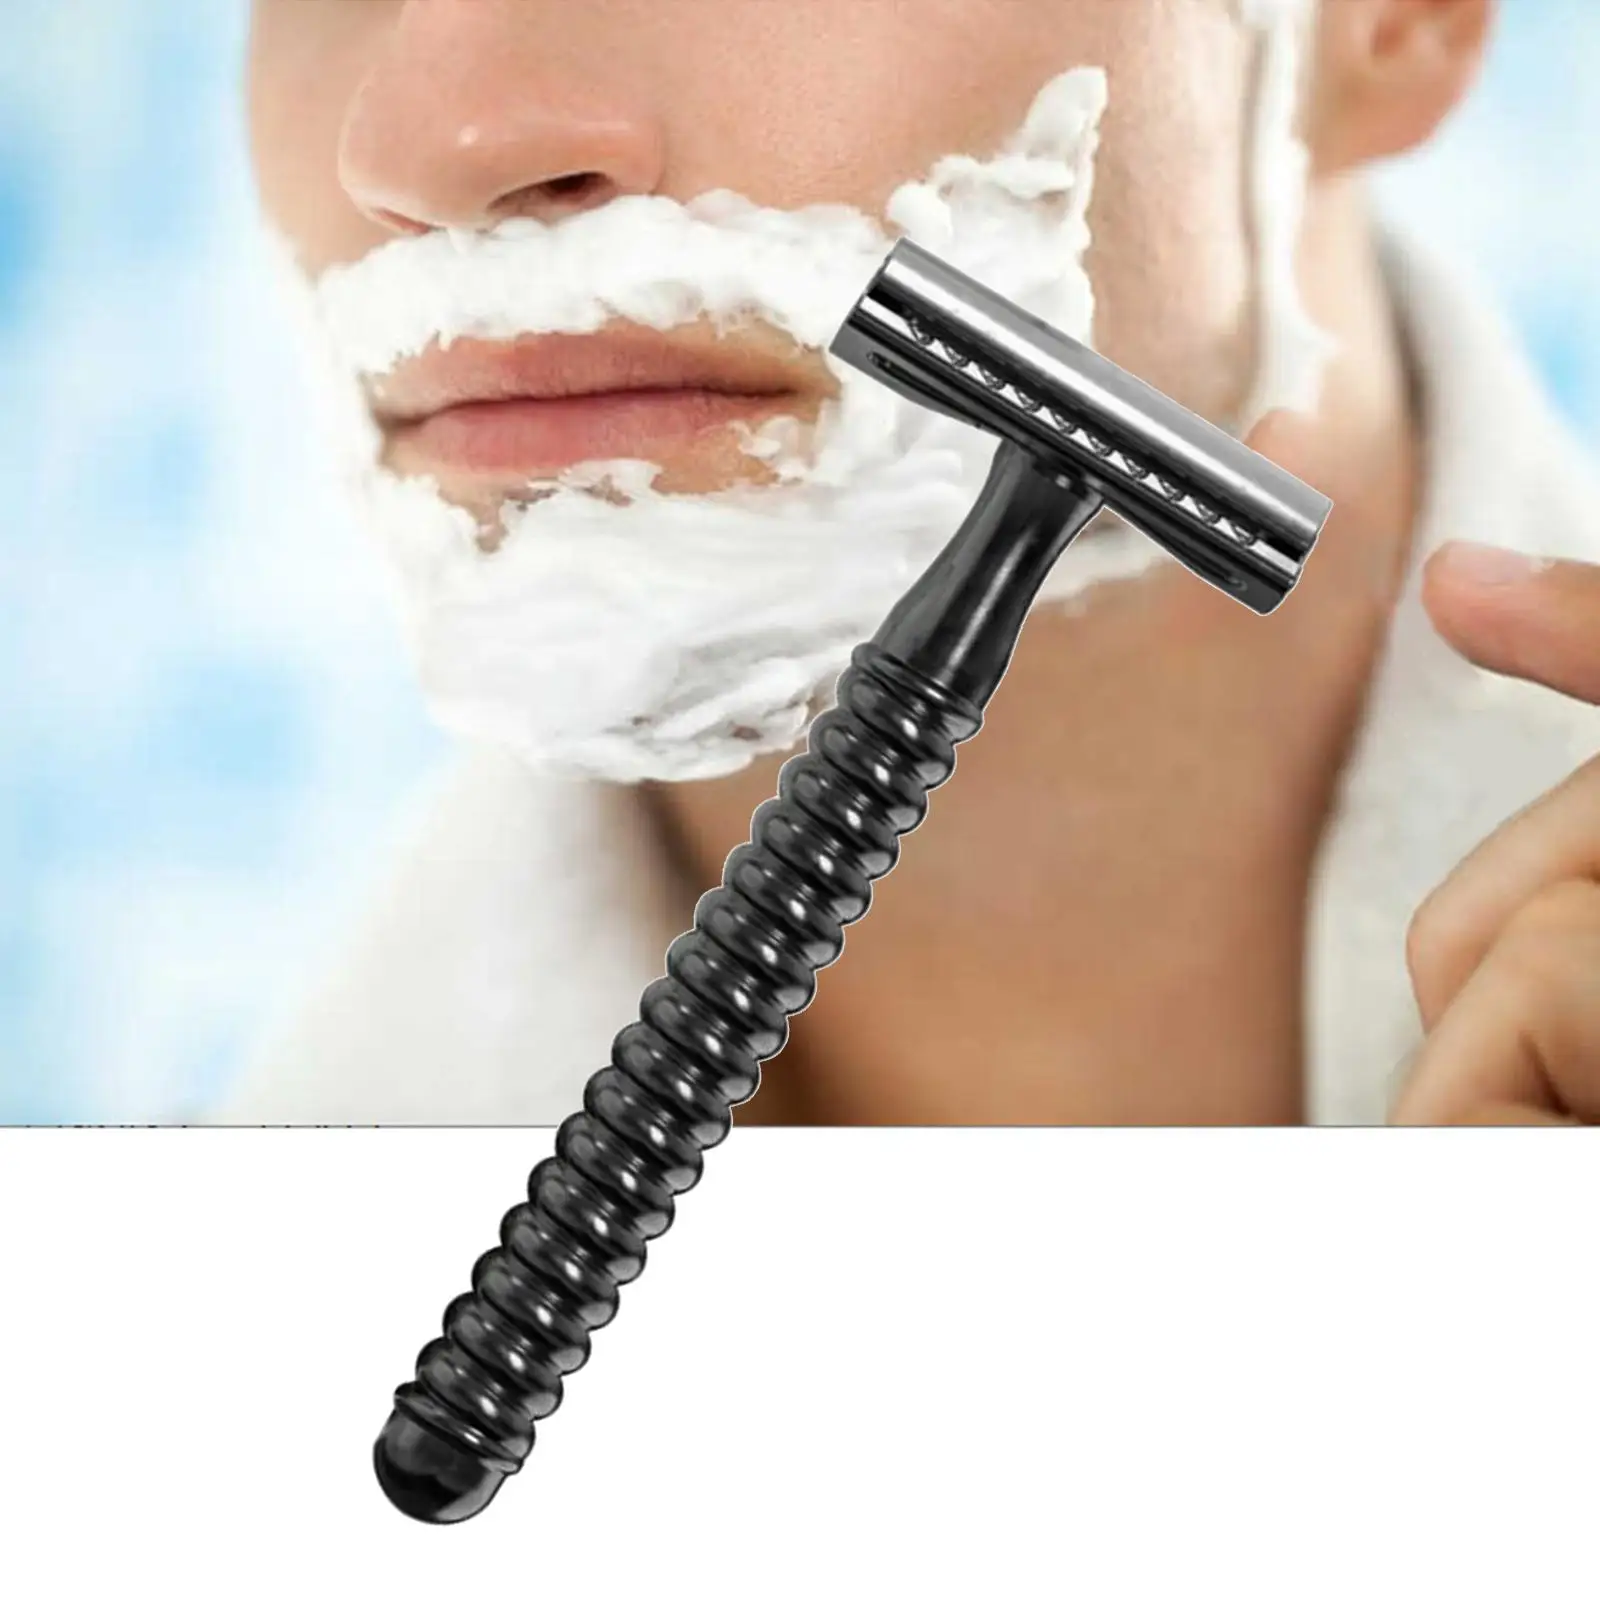 Classic Men Metal Double Edge Safety  Stylish Close clean easily Use  Shave Gifts Reusable Durable Wet Shaving Cost Effective